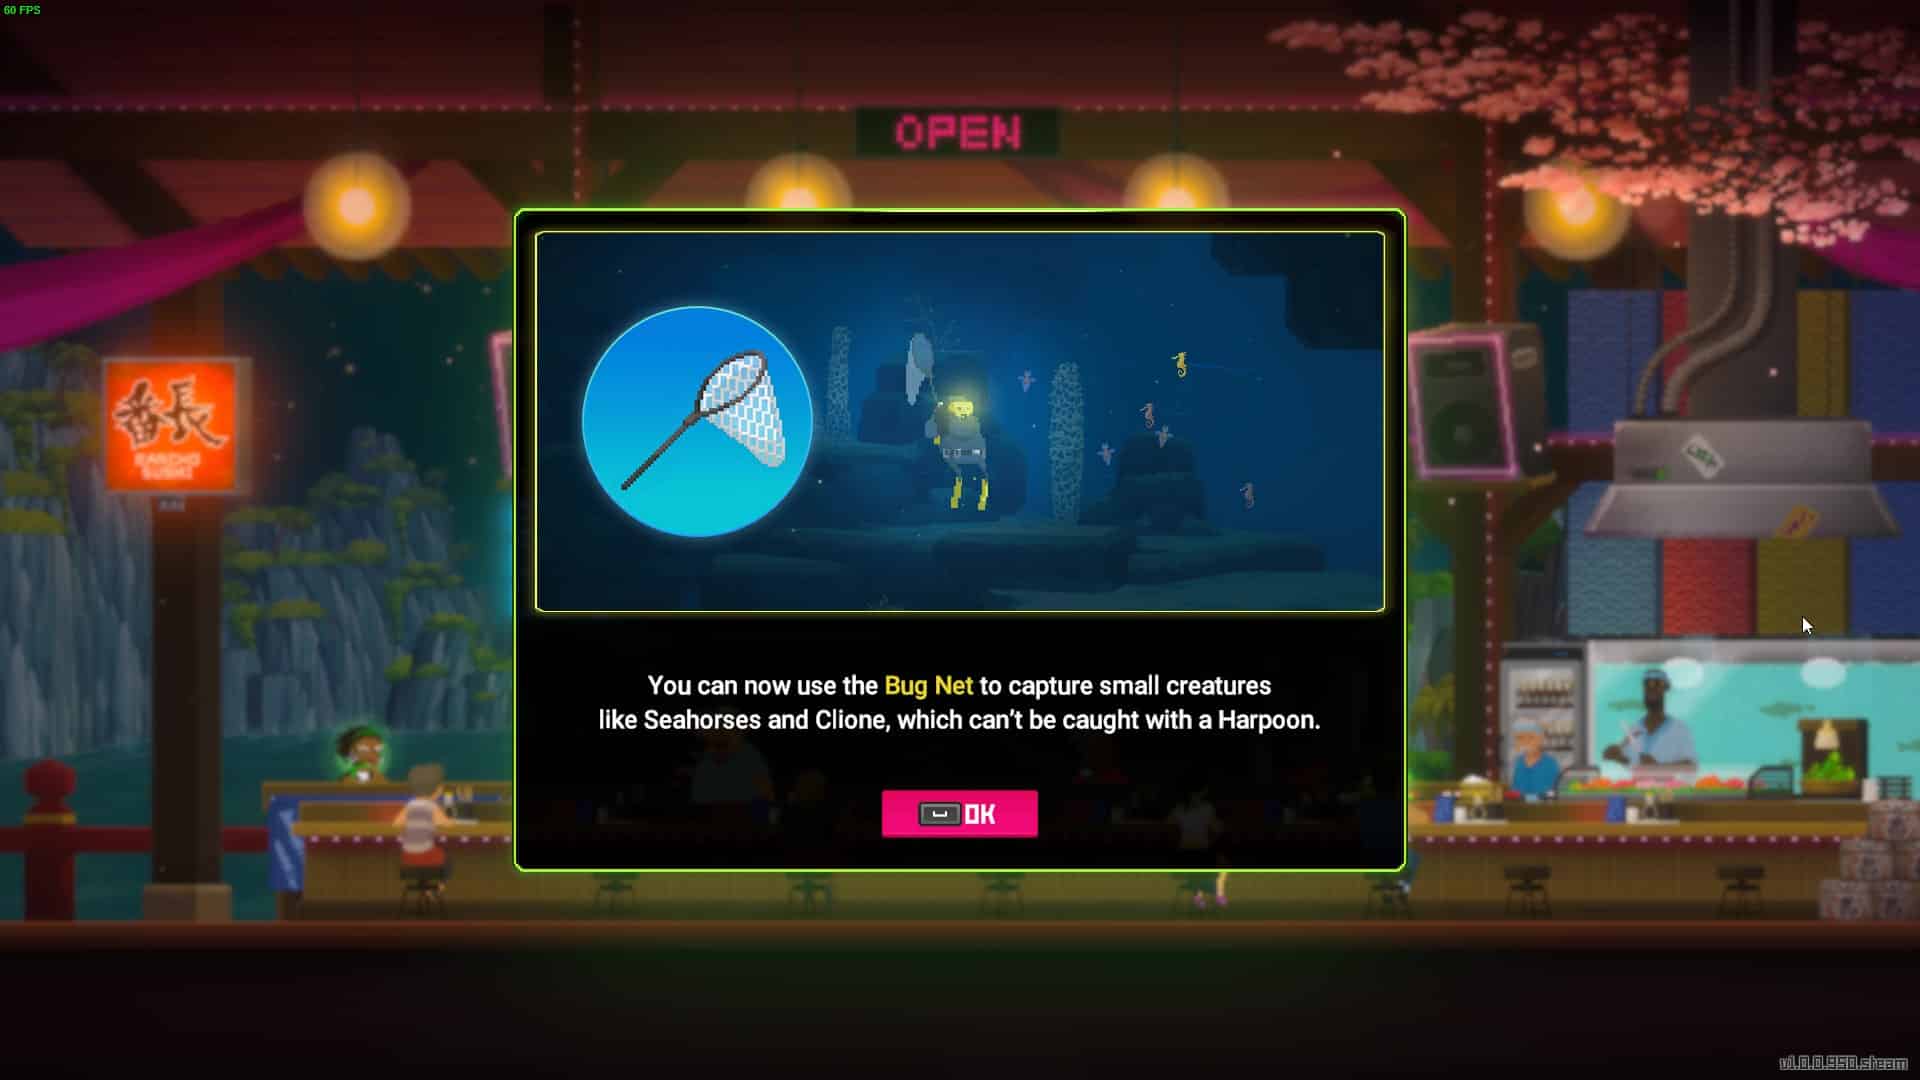 How to catch a seahorse in Dave the Diver: bug net unlock screen after completing Reticent Girl mission.